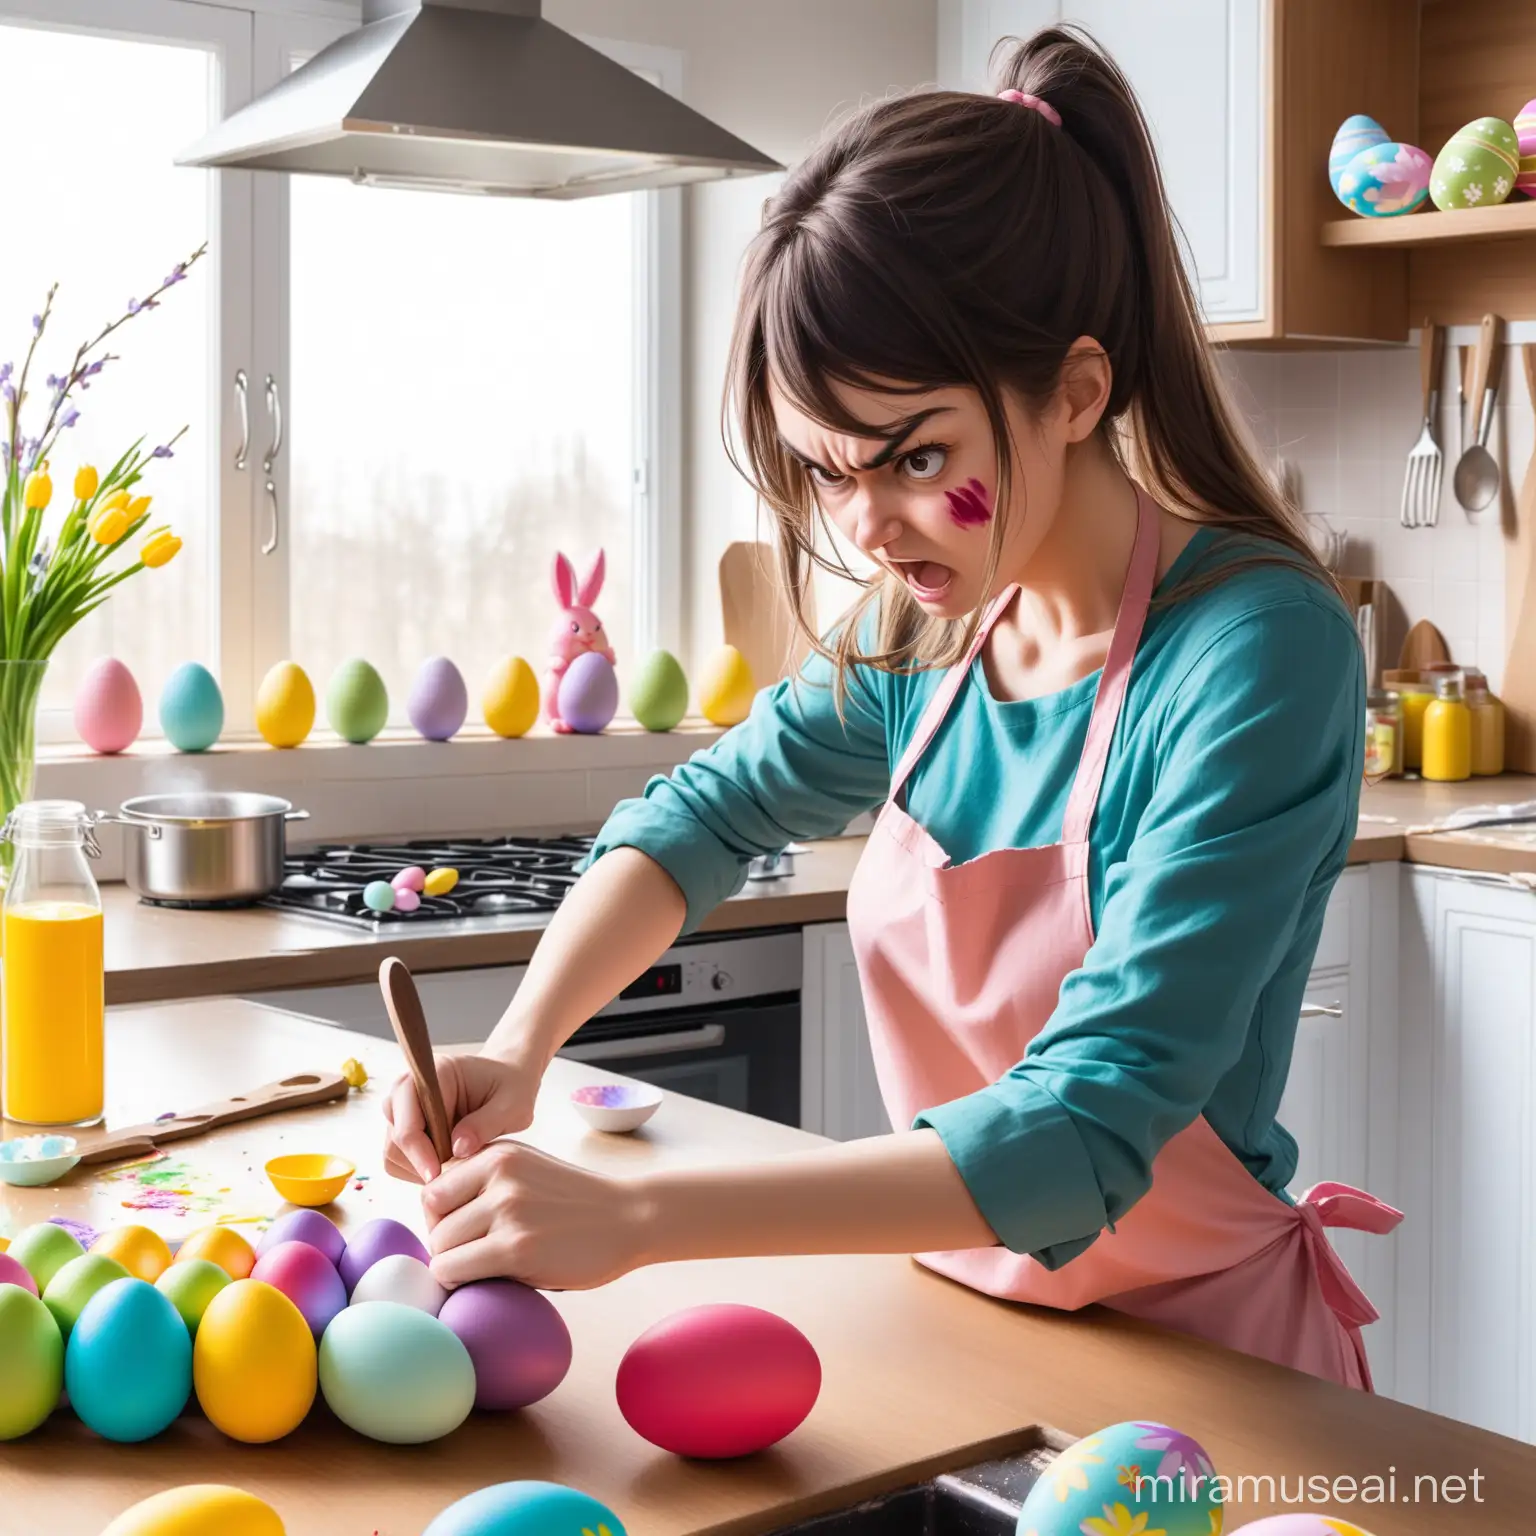 Irritated Woman Preparing Meal Amidst Vibrant Easter Eggs and Chaotic Spring Decor